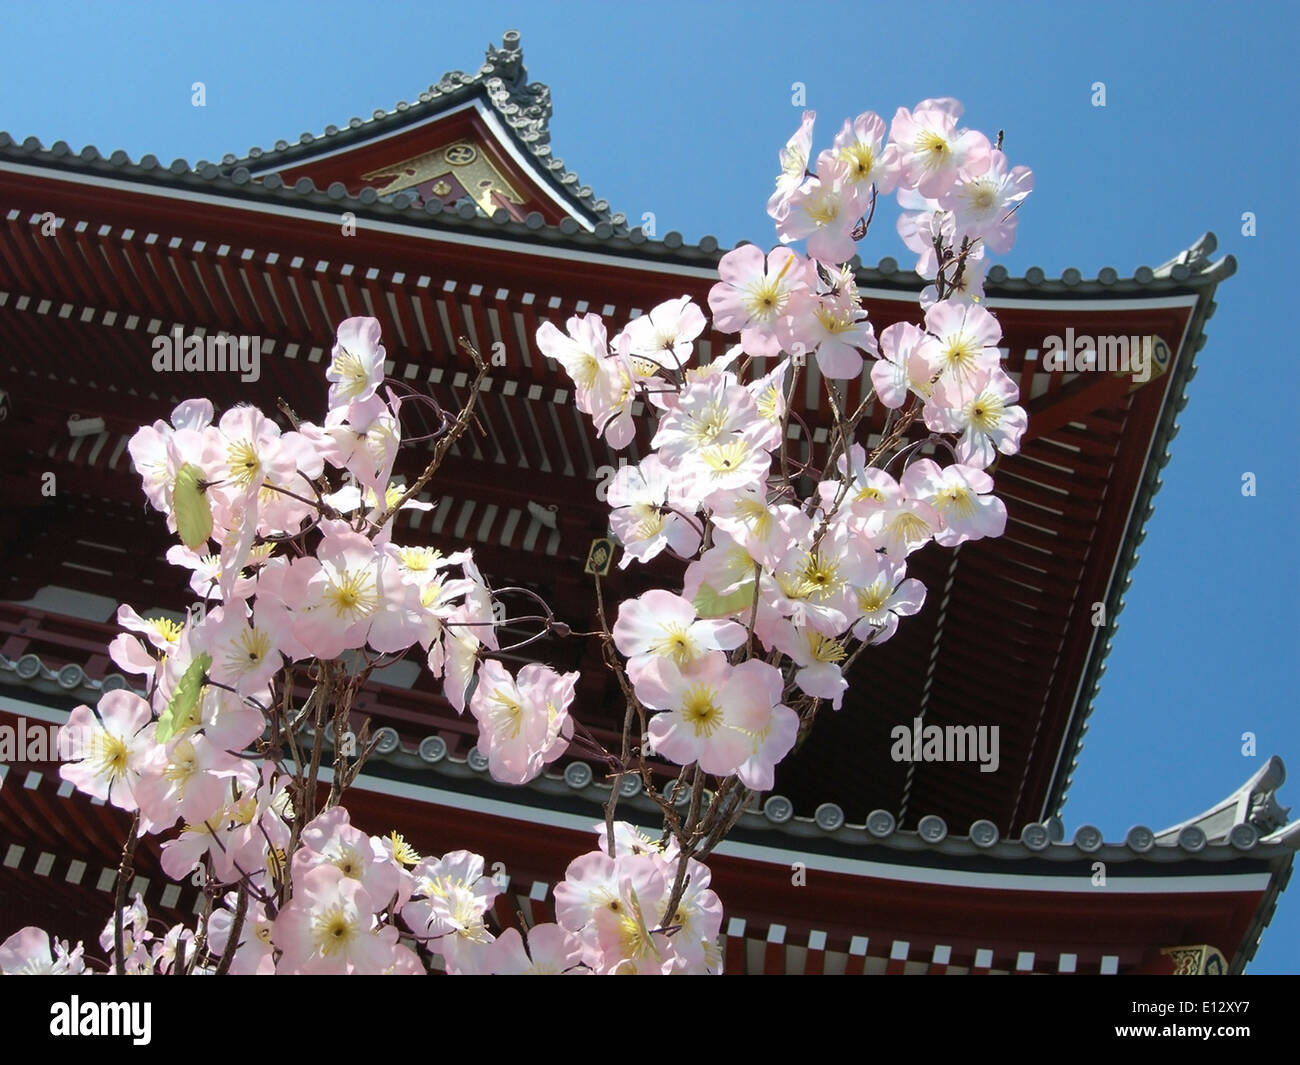 Sakura, Japanese cherry blossom in Tokyo: Cherry blossom with traditional Japanese pagoda building in the background Stock Photo